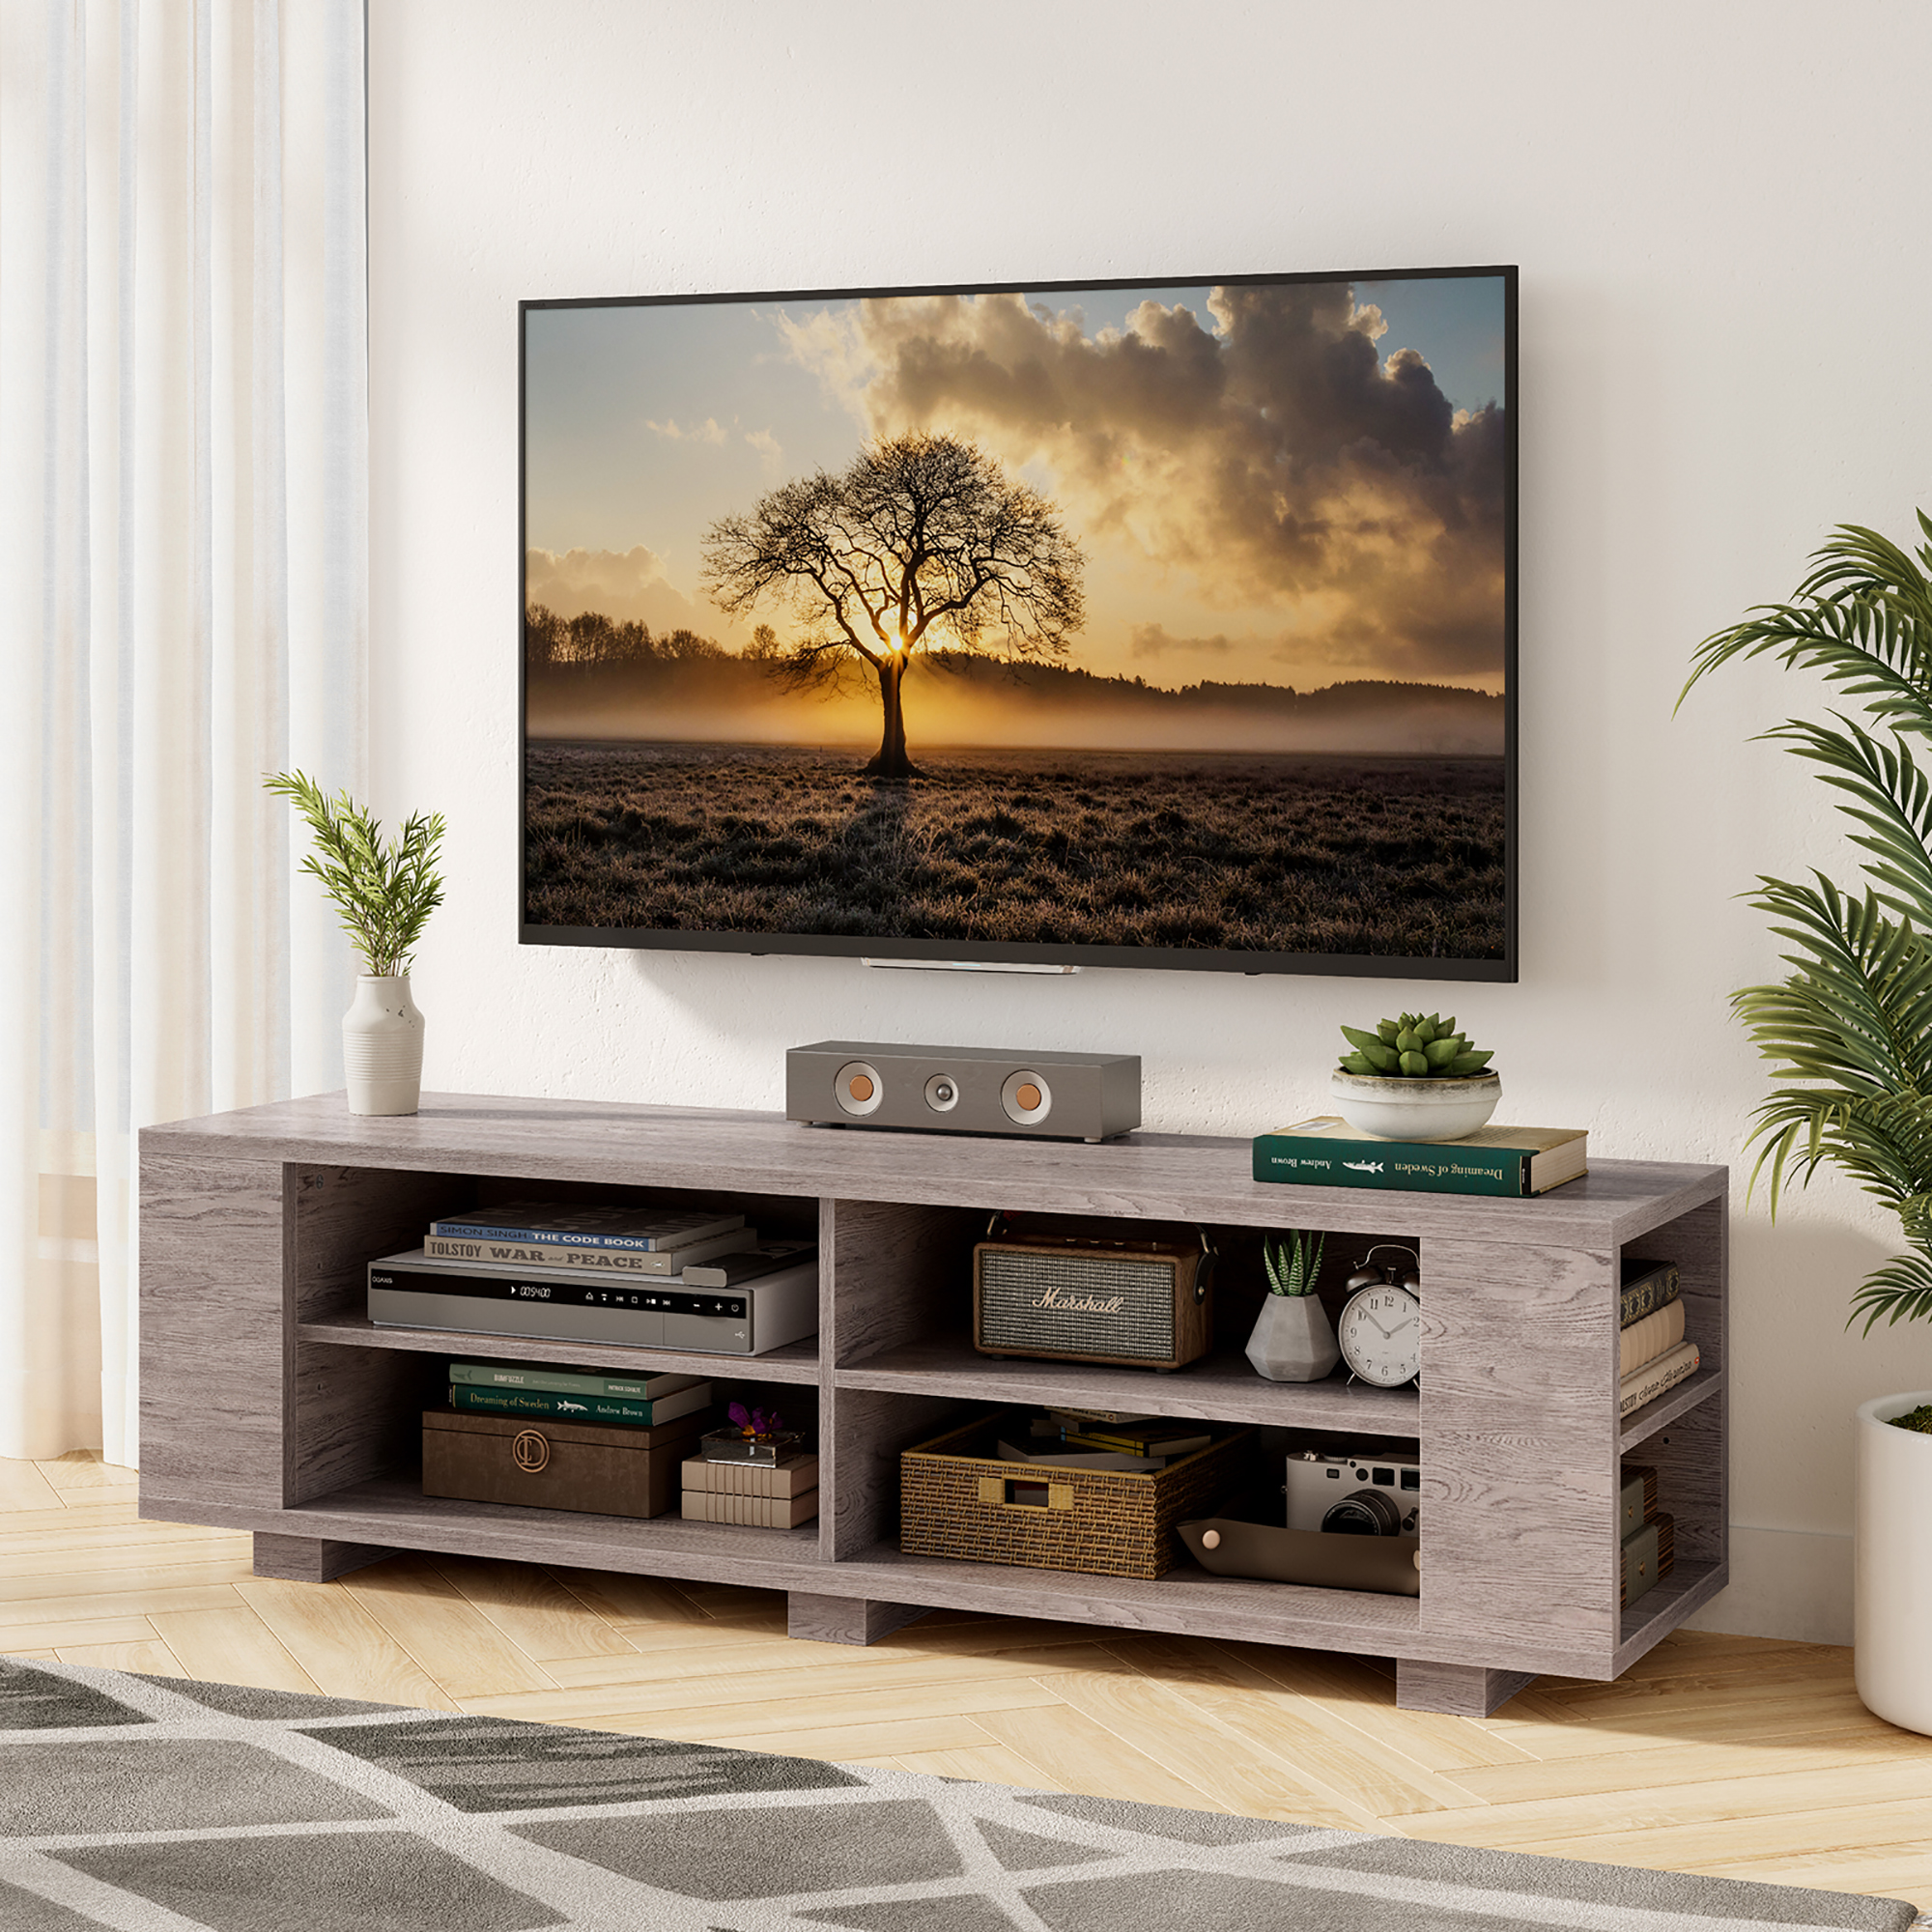 Costway 59'' Wood TV Stand Console Storage Entertainment Media Center with Shelf Grey - image 2 of 9